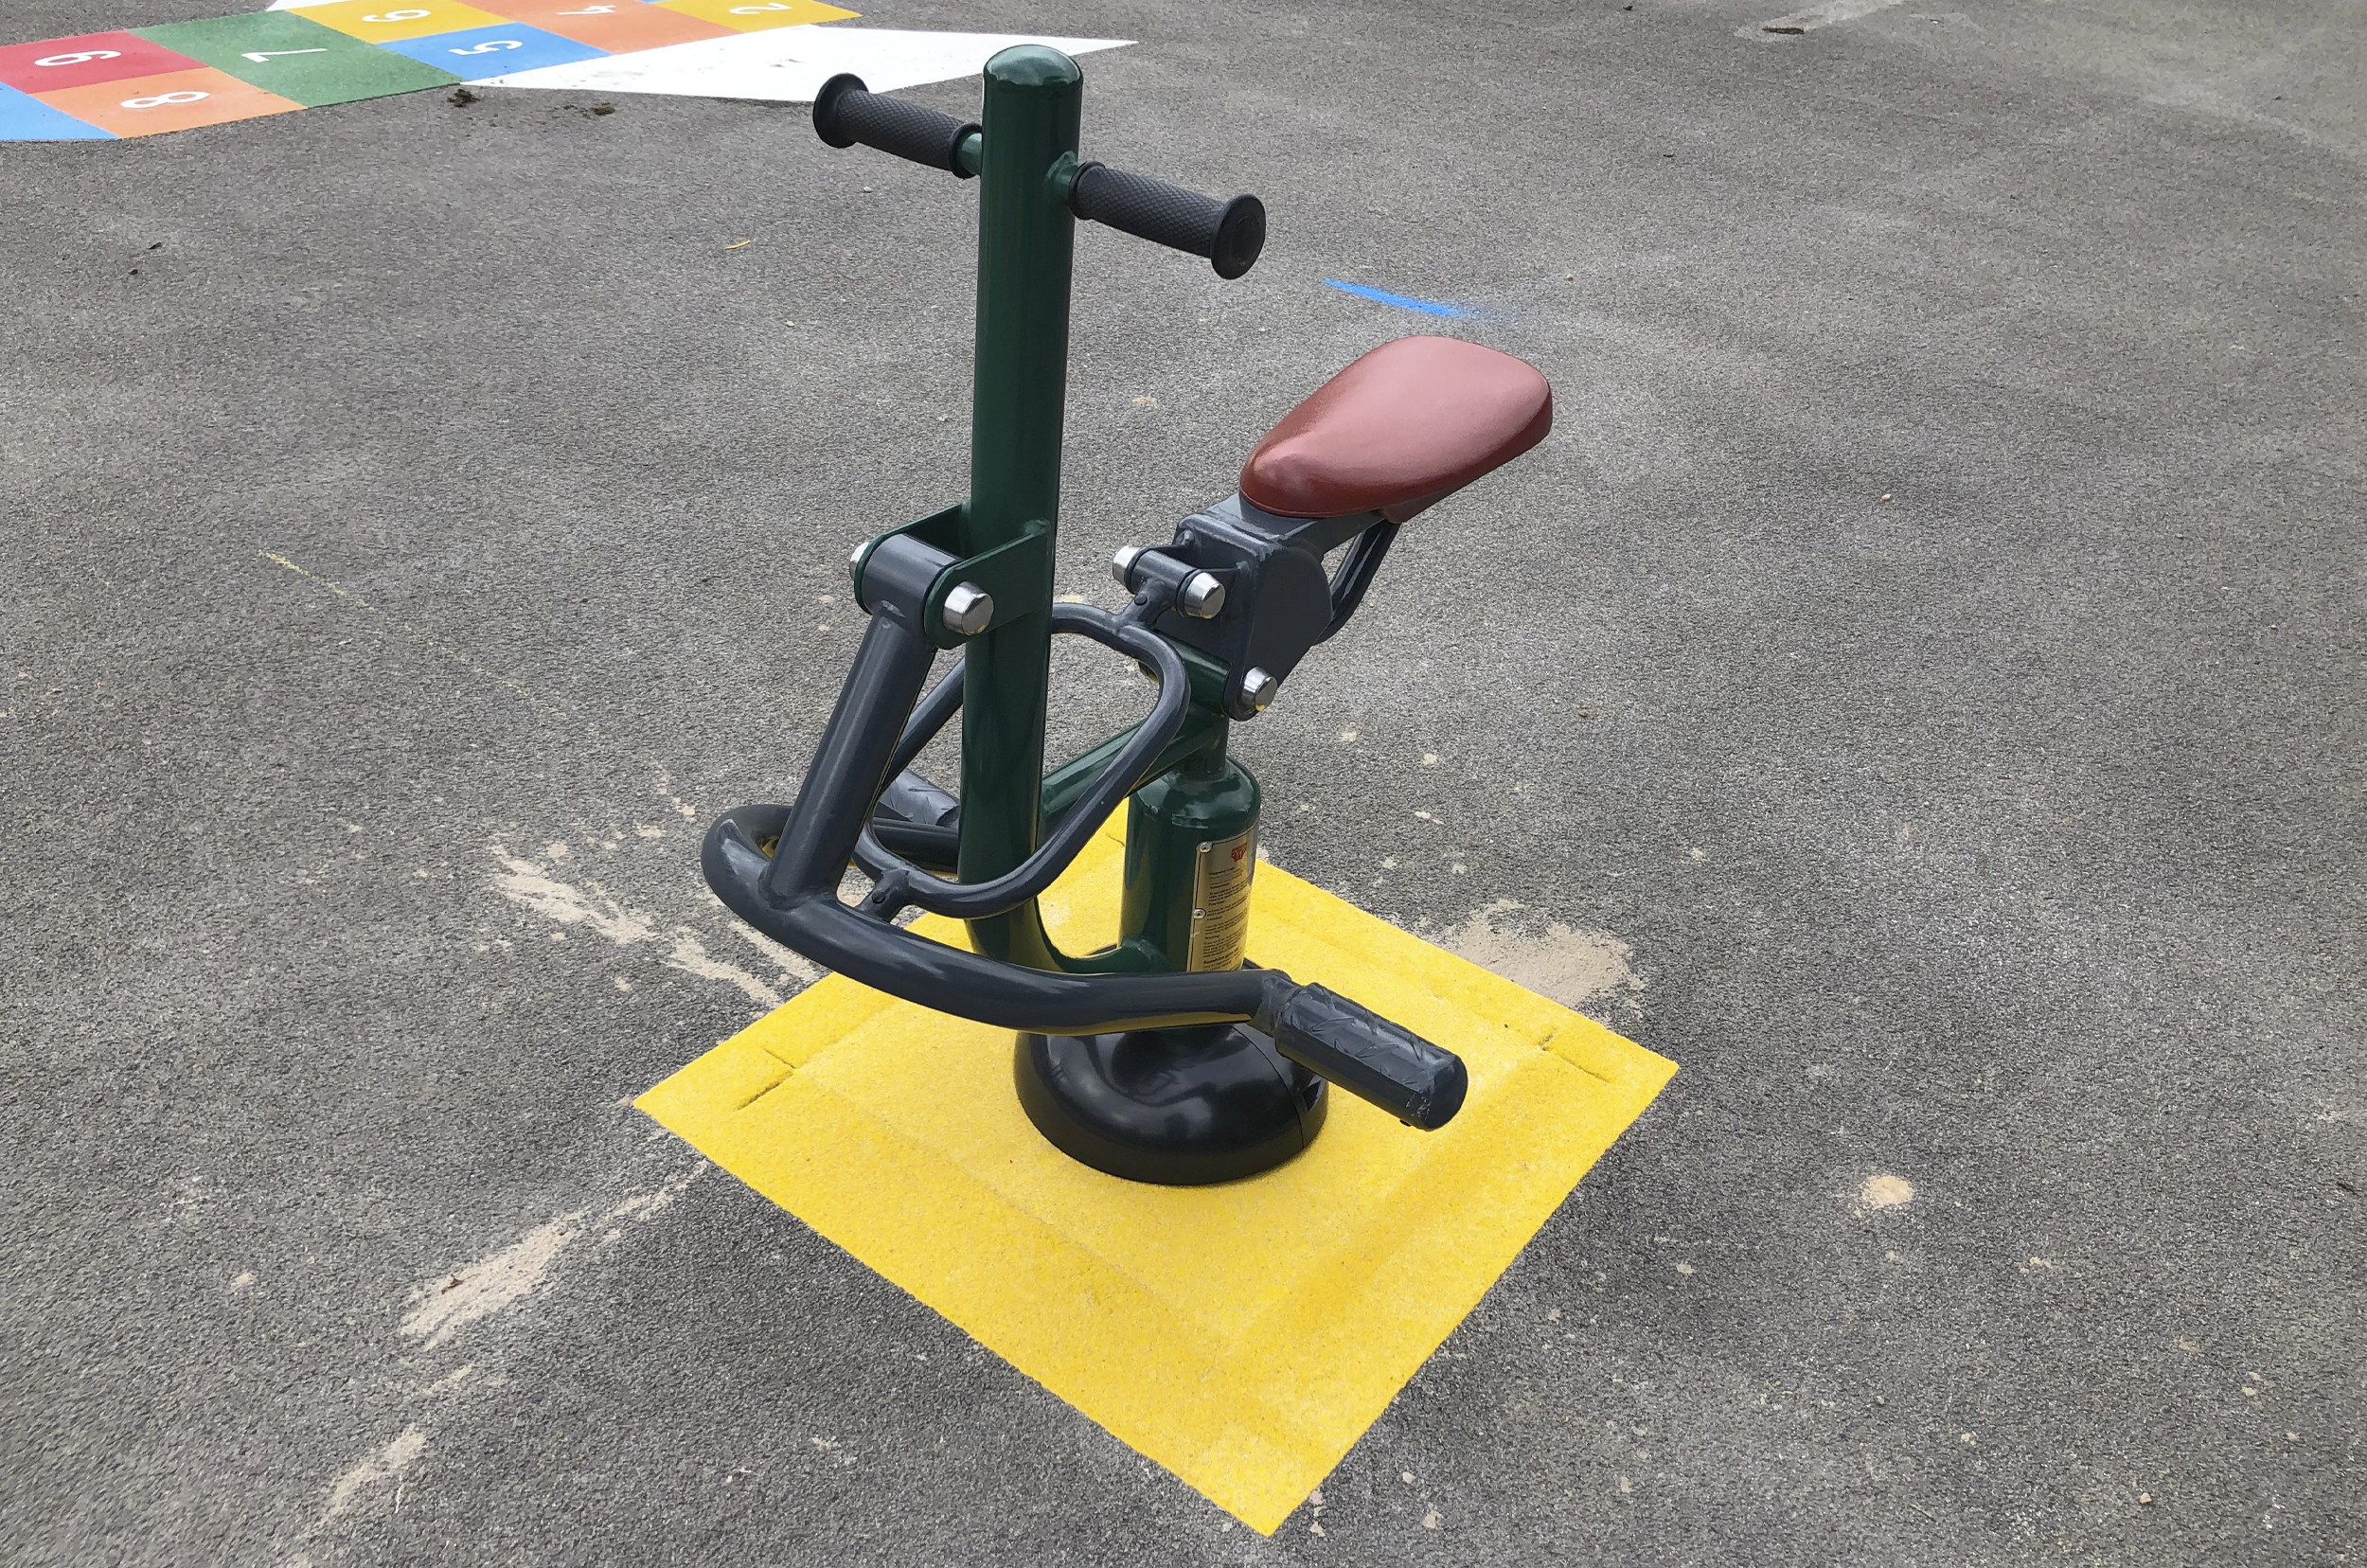 the children's horse rider simulates the up and down motion of riding a horse, it has a seat, two foot holds and a shoulder height handle. it is sitting on a tarmac playground with a yellow coloured square